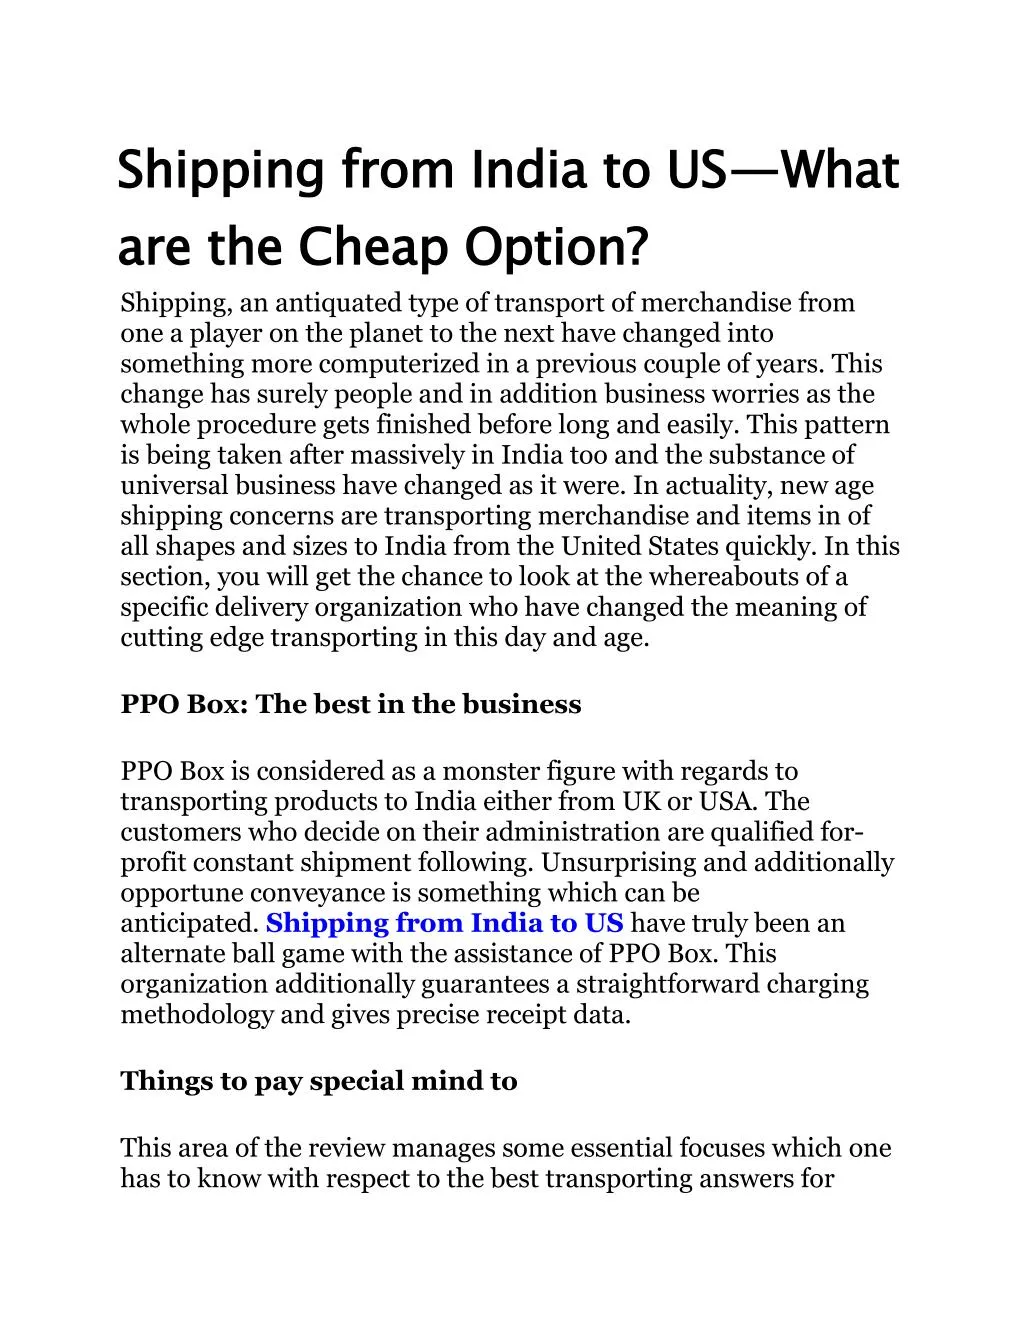 shipping from india to us are the cheap shipping